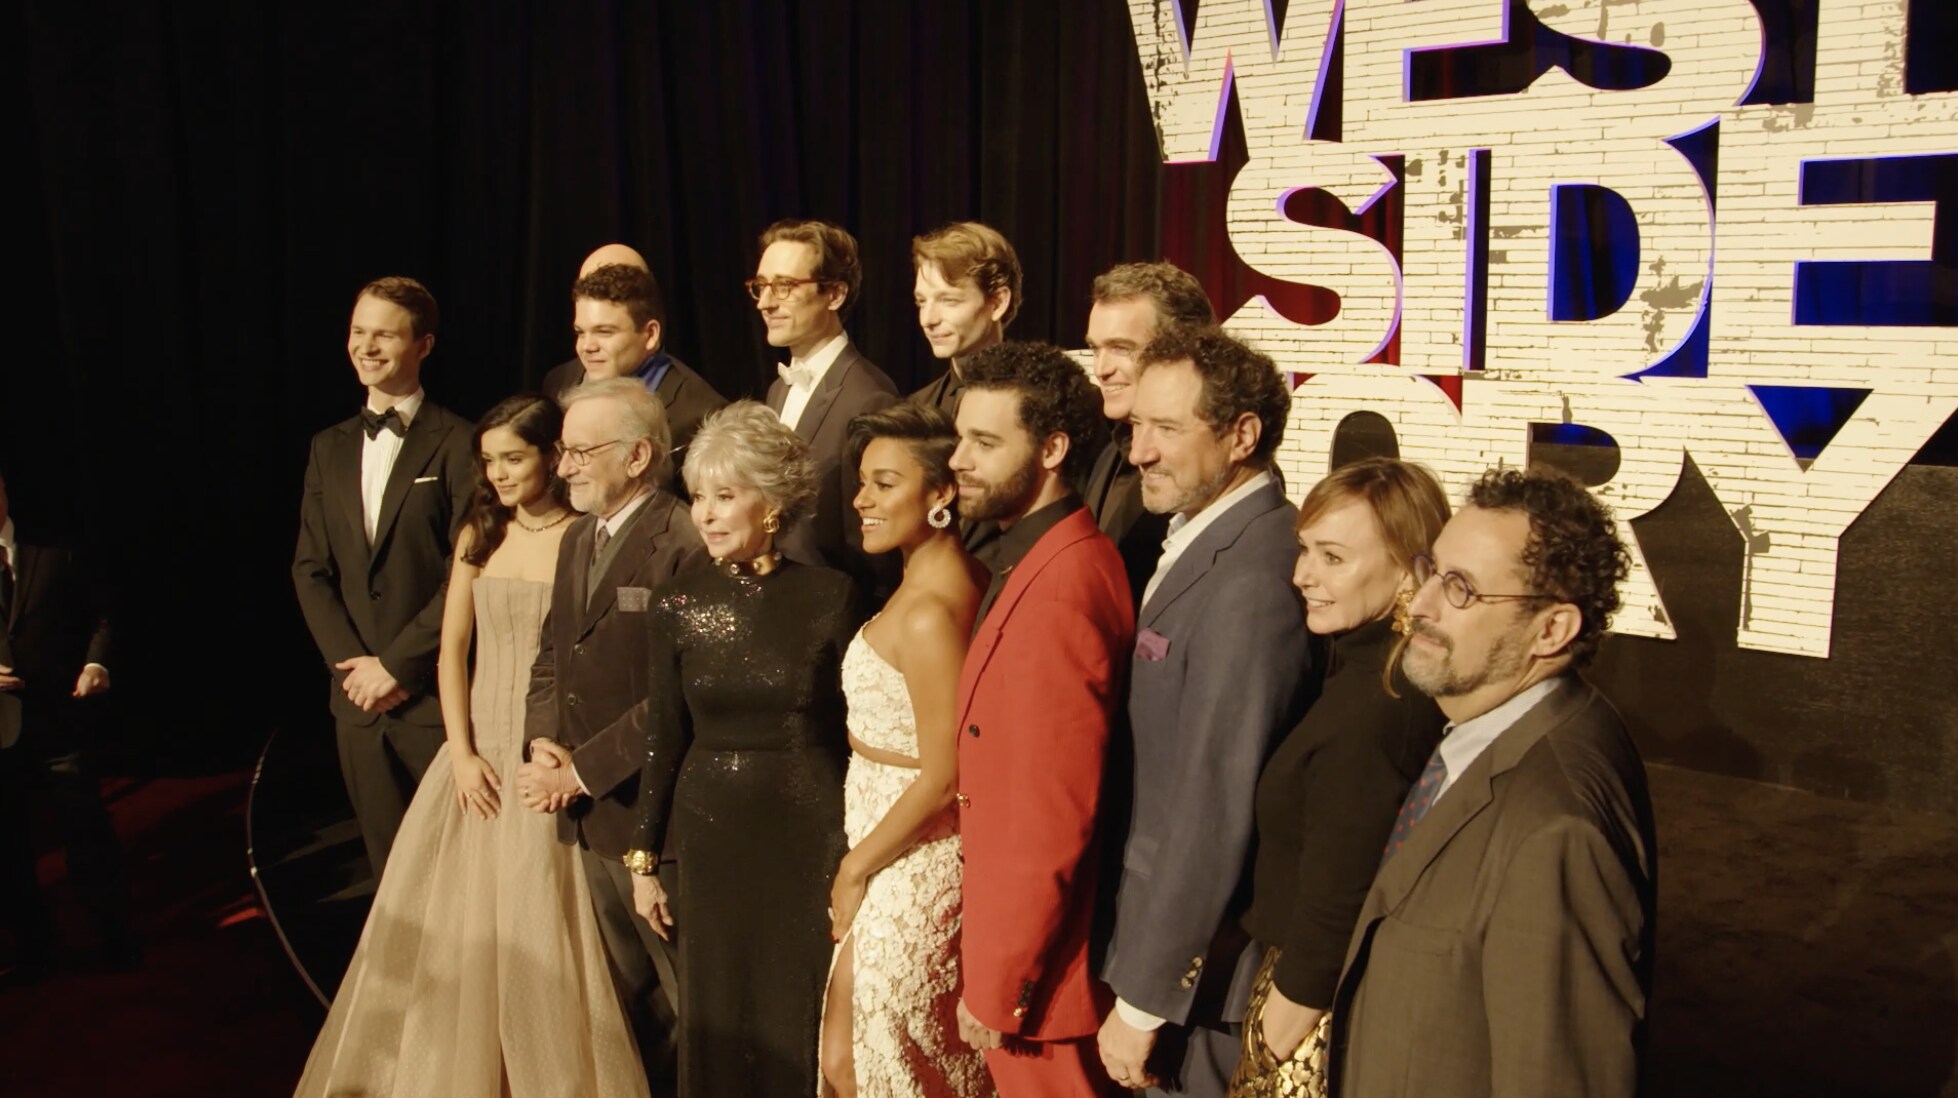 The stars of Steven Spielberg's #WestSideStory stepped onto the red carpet last night to celebrate the World Premiere of the film in New York City! 🎶✨ Get your tickets now to experience it only in theaters in 10 days. fandango.com/WestSideStory